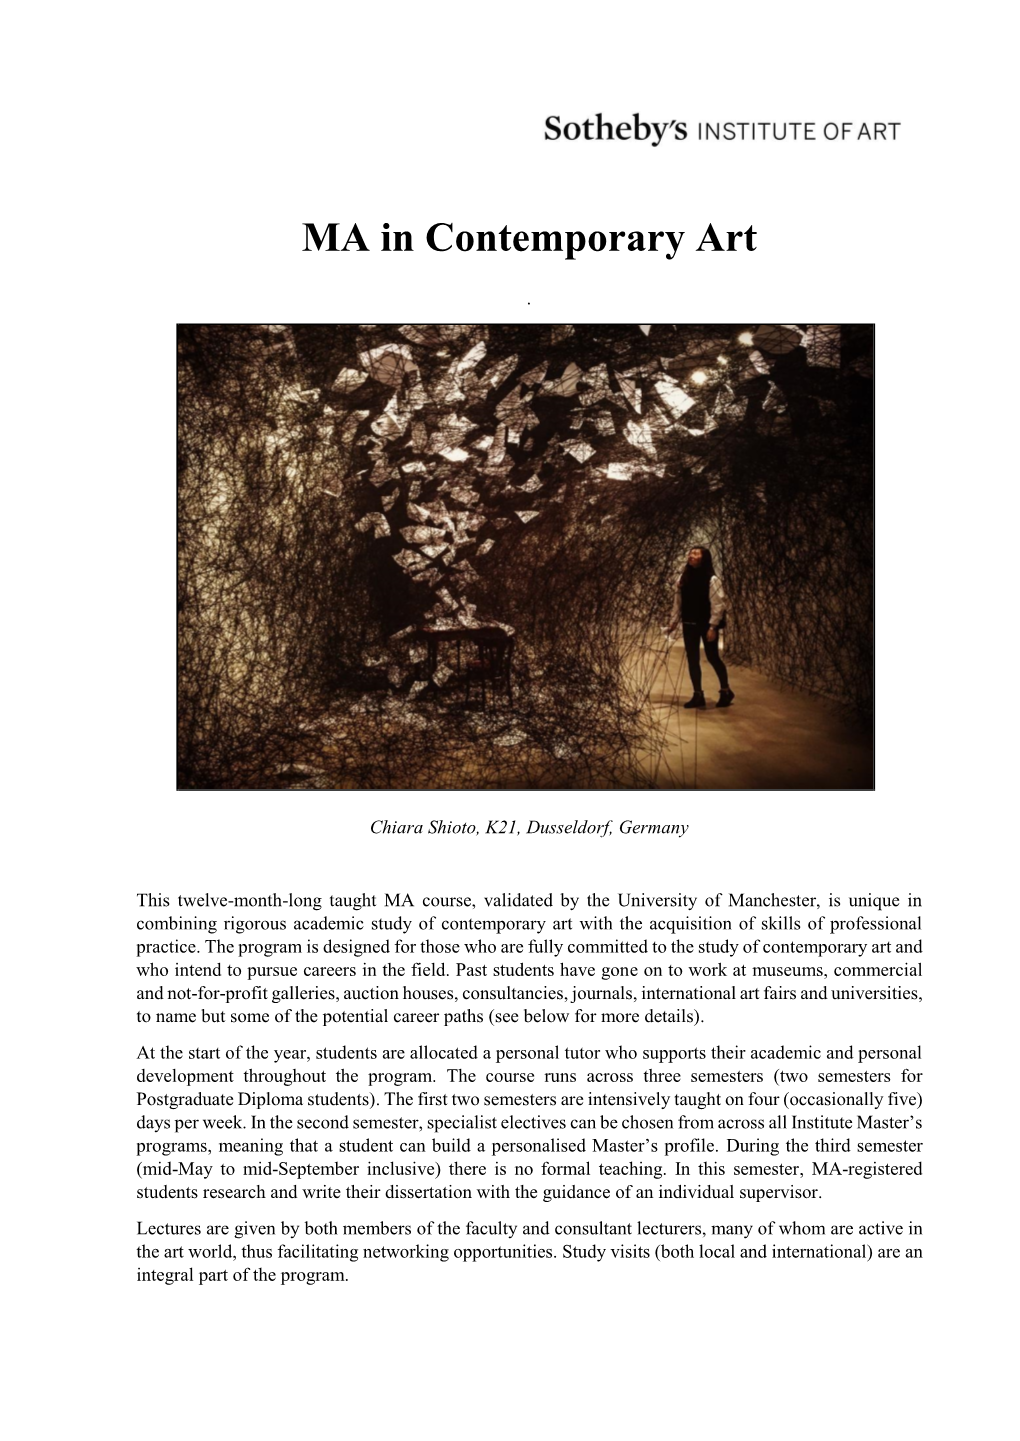 Masters' in Contemporary